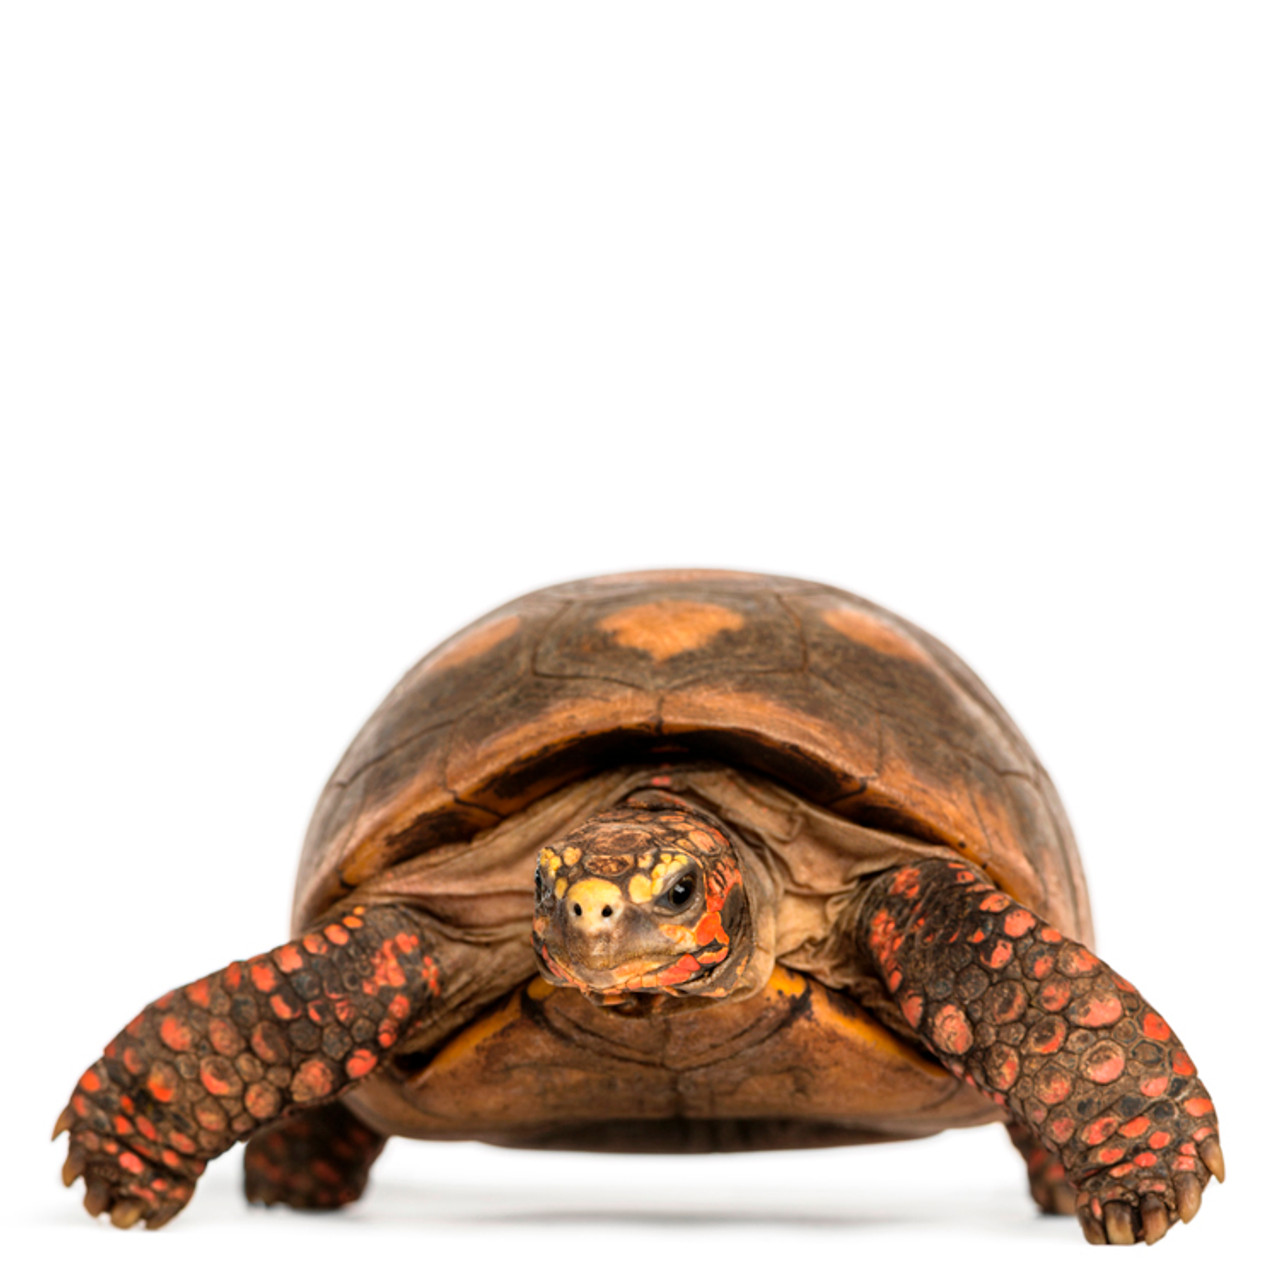 Adult Male Red Footed Tortoise